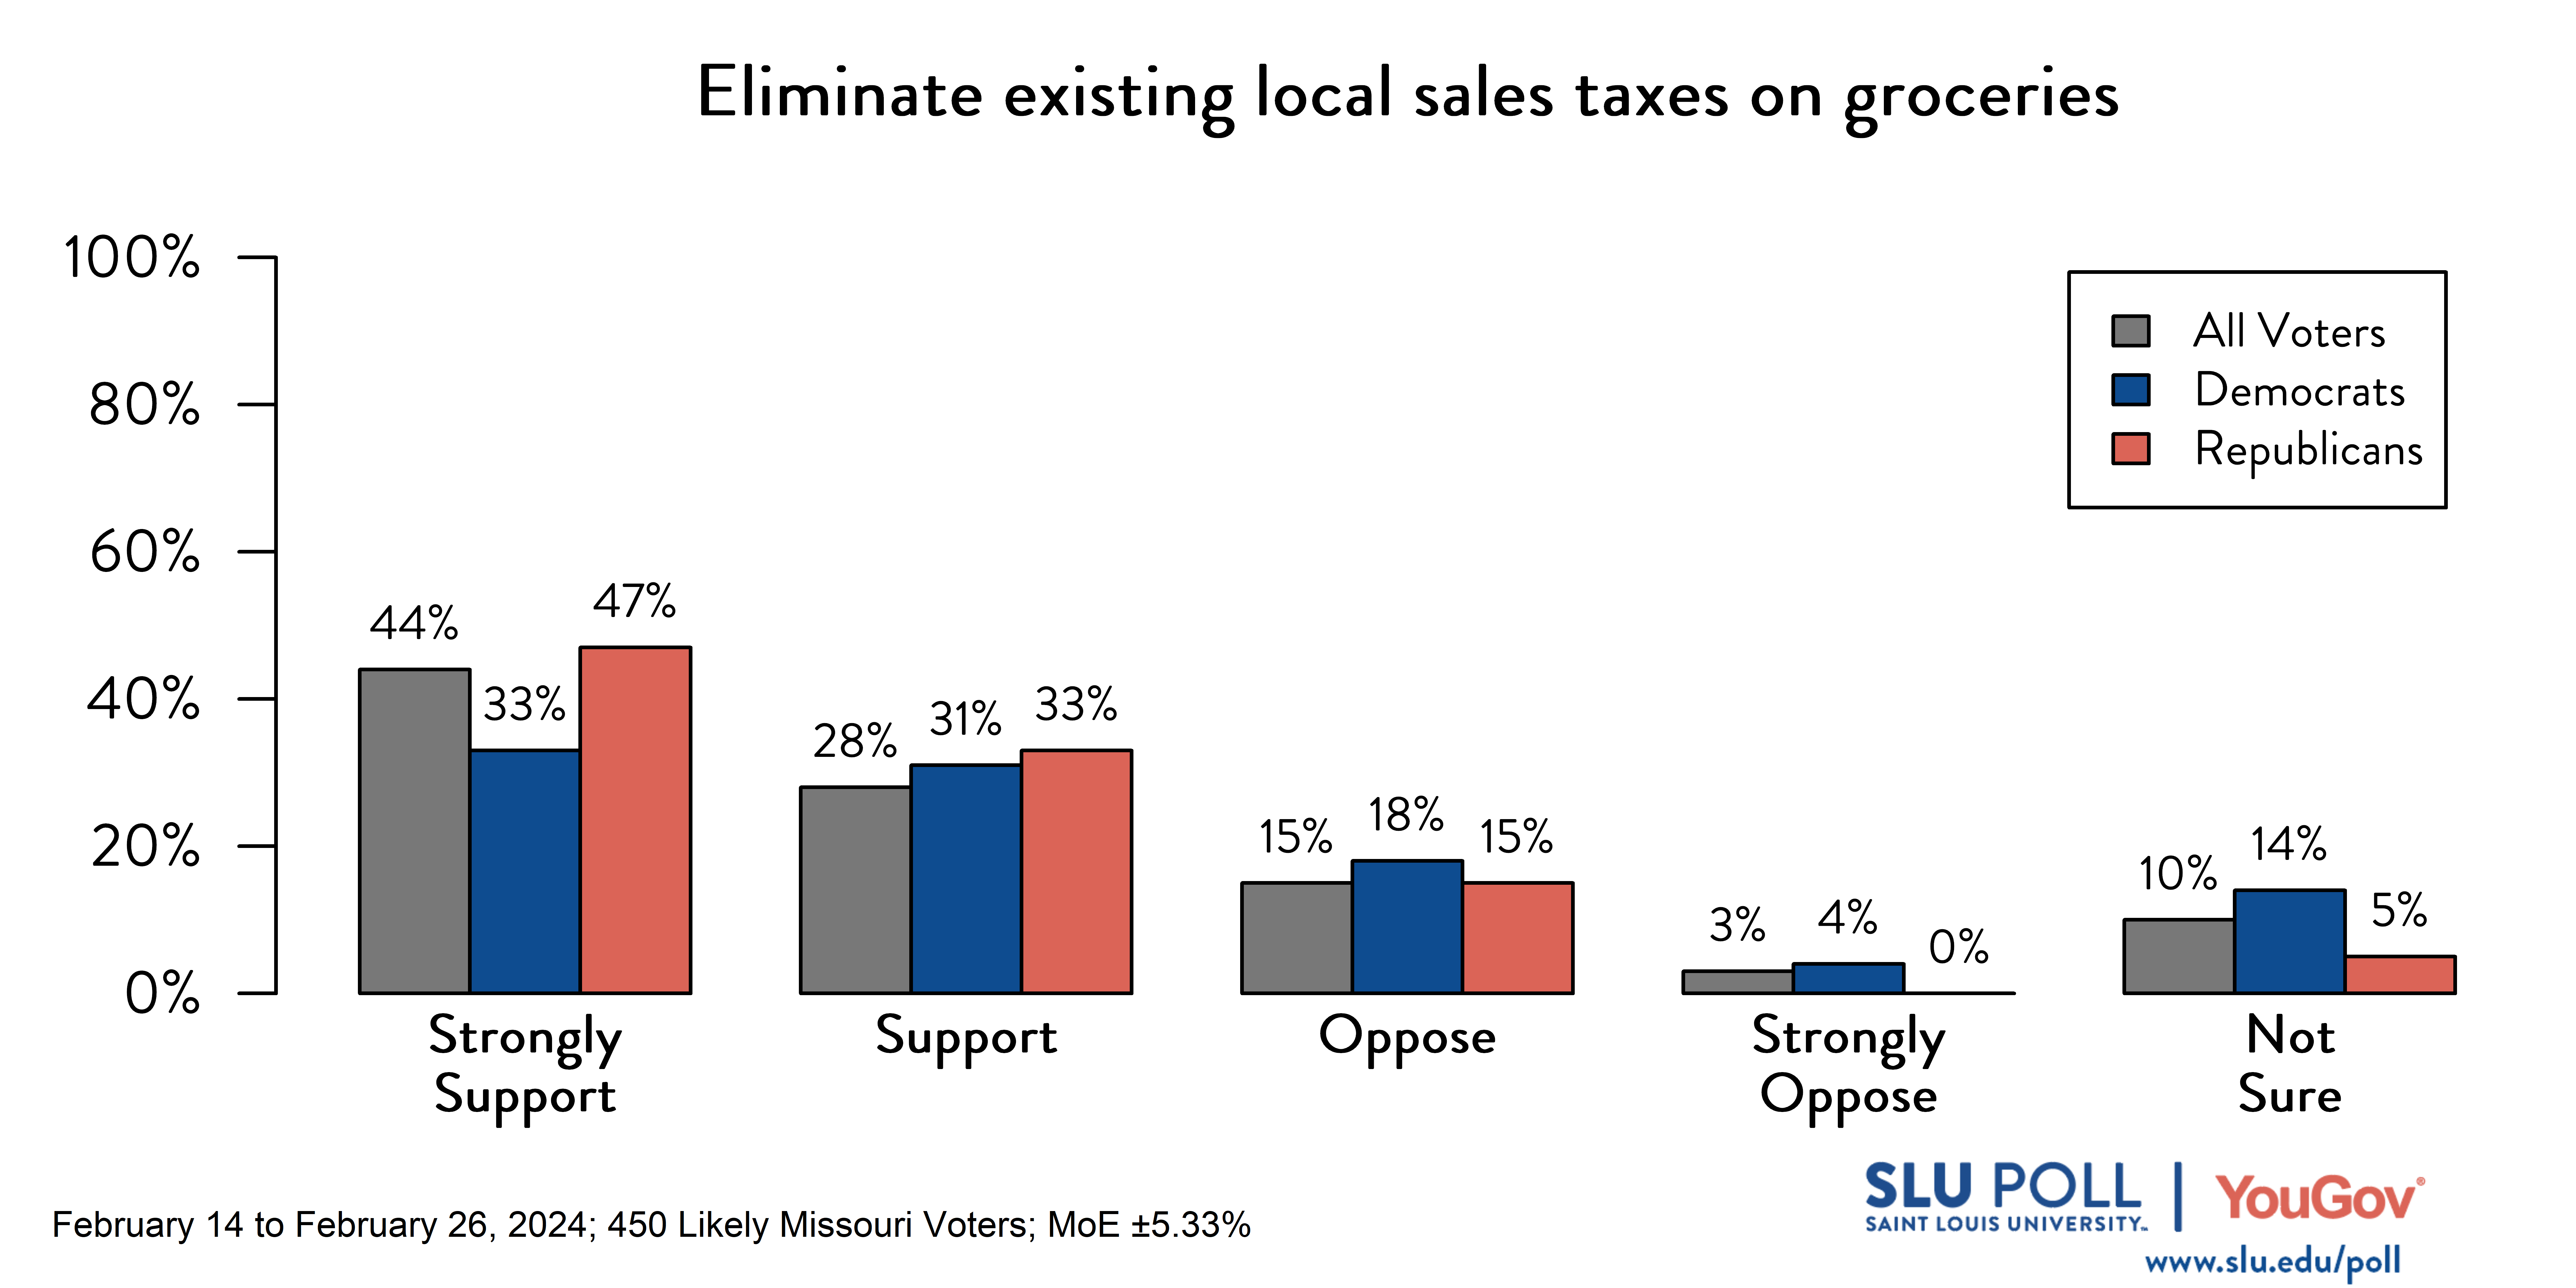 Bar graph of SLU/YouGov Poll results for local groceries tax question. Results in caption